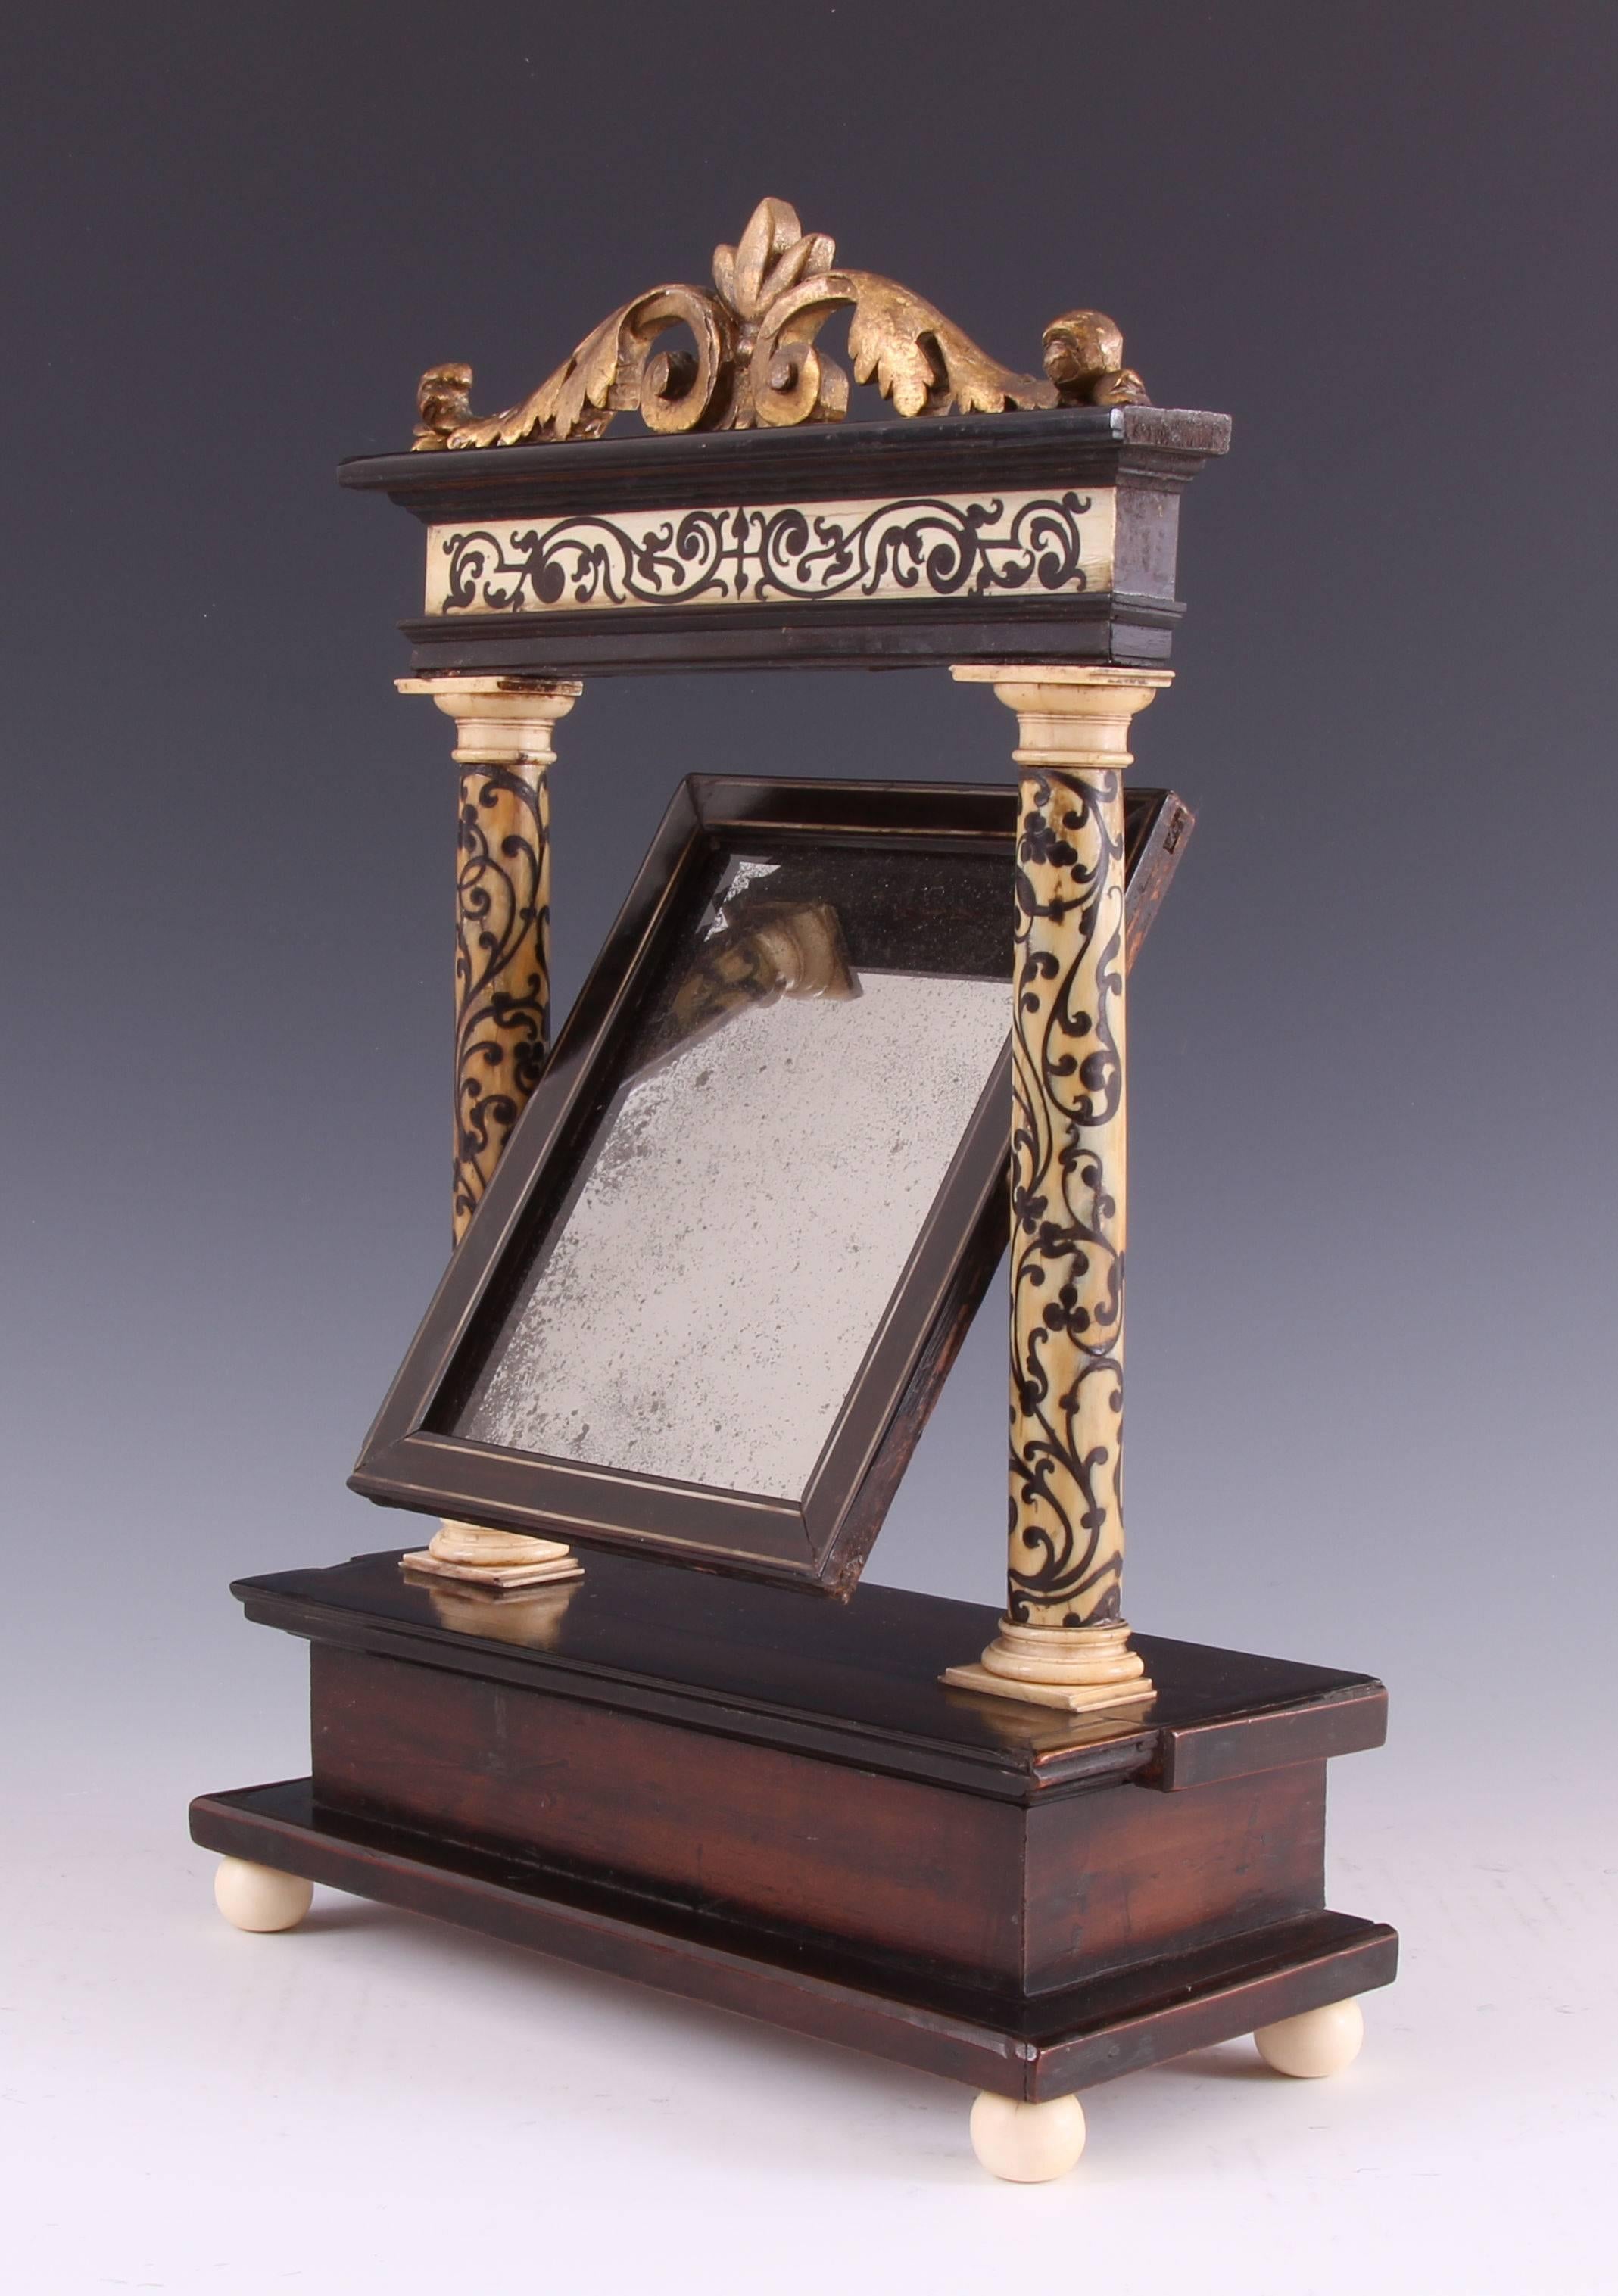 Rare 17th century Neapolitan ebony and bone inlaid walnut giltwood mounted toilet mirror. The rarity of this small piece cannot be overstated. The veneered inlaid columns are superb and a delight to behold, as is the inlaid frieze. The giltwood leaf